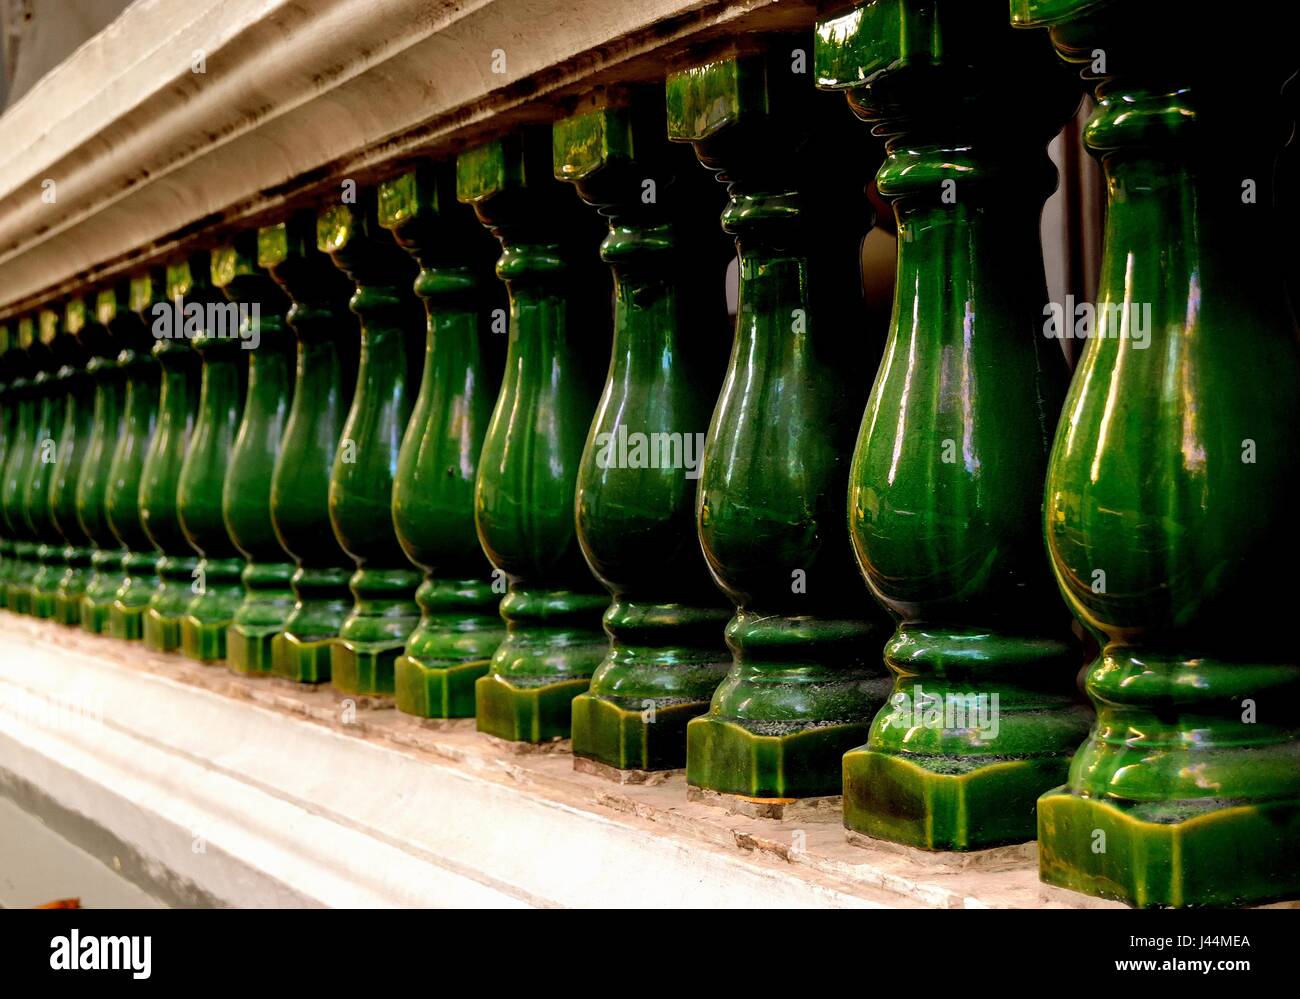 Perspective soft focus view of old stone balustrade with green pillars as vintage background Stock Photo